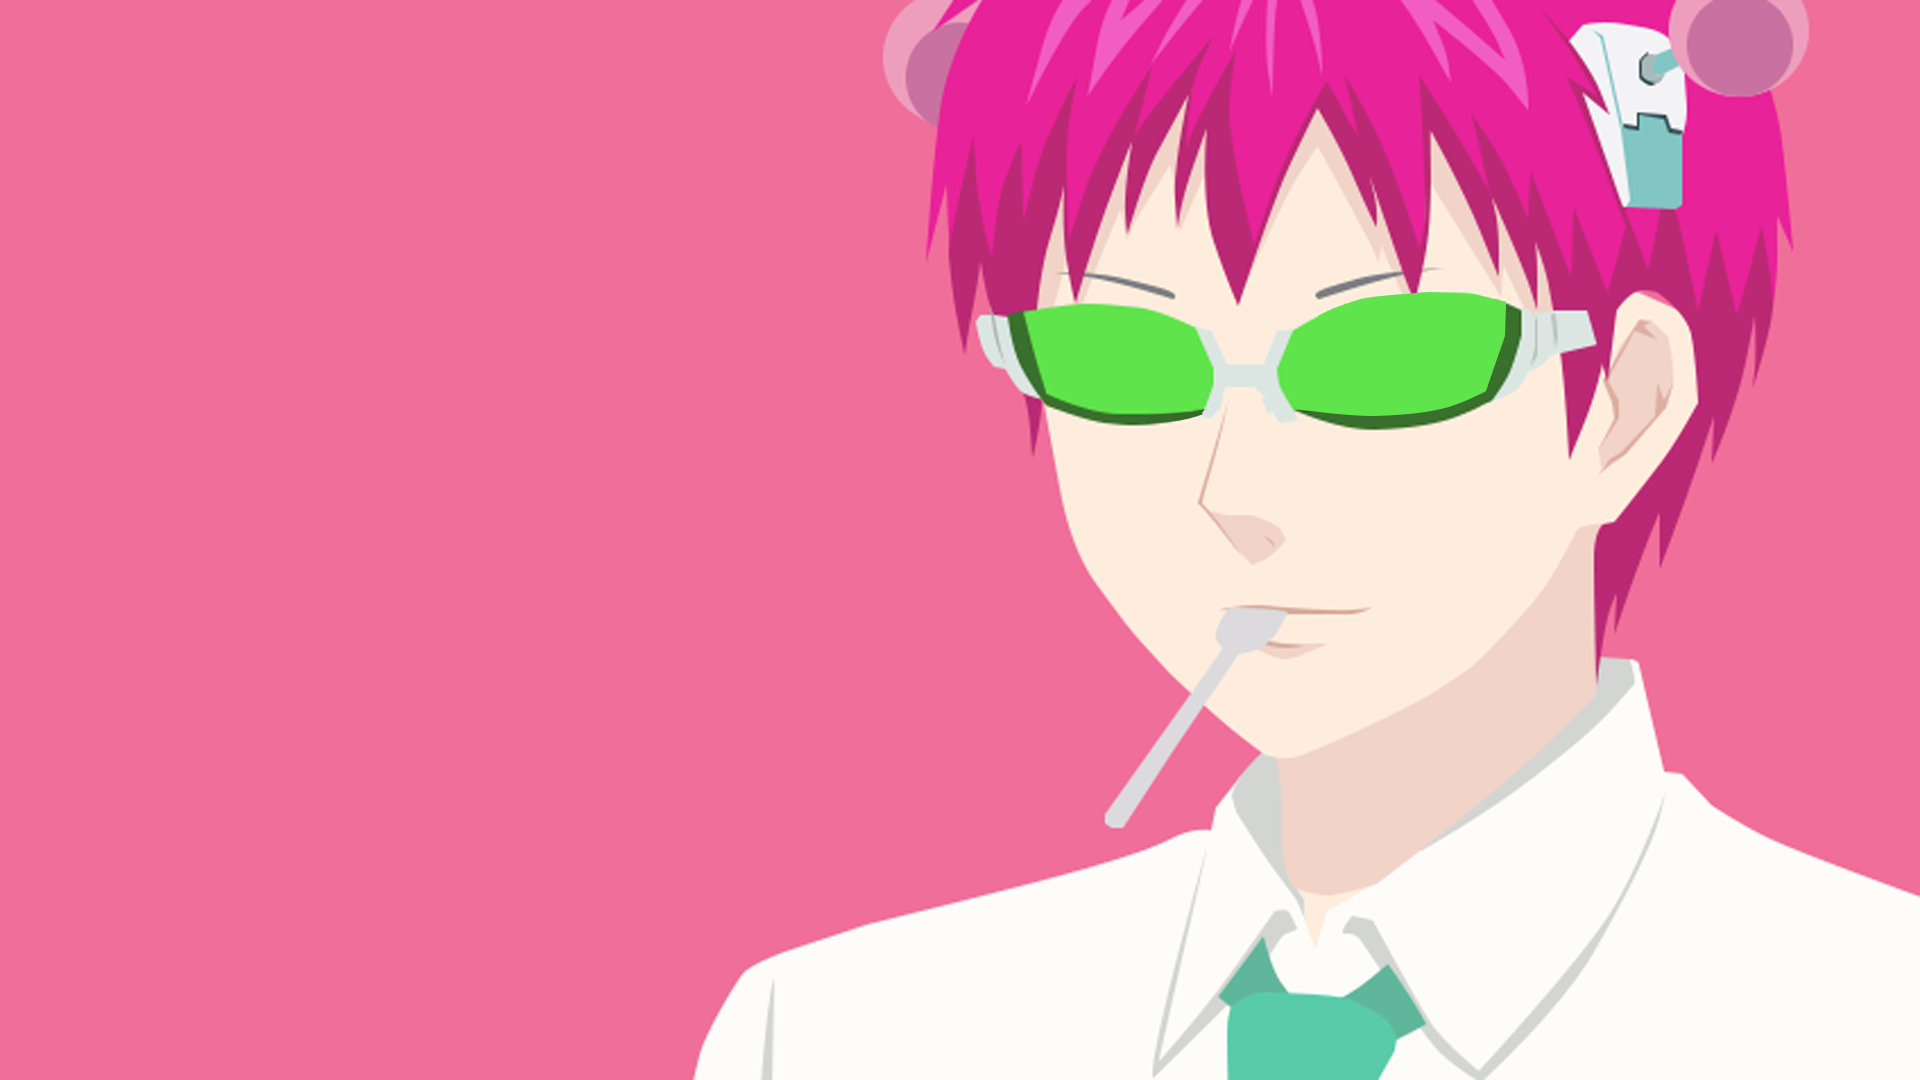 The Disastrous Life of Saiki K. Picture by YaMaKEN - Image Abyss.